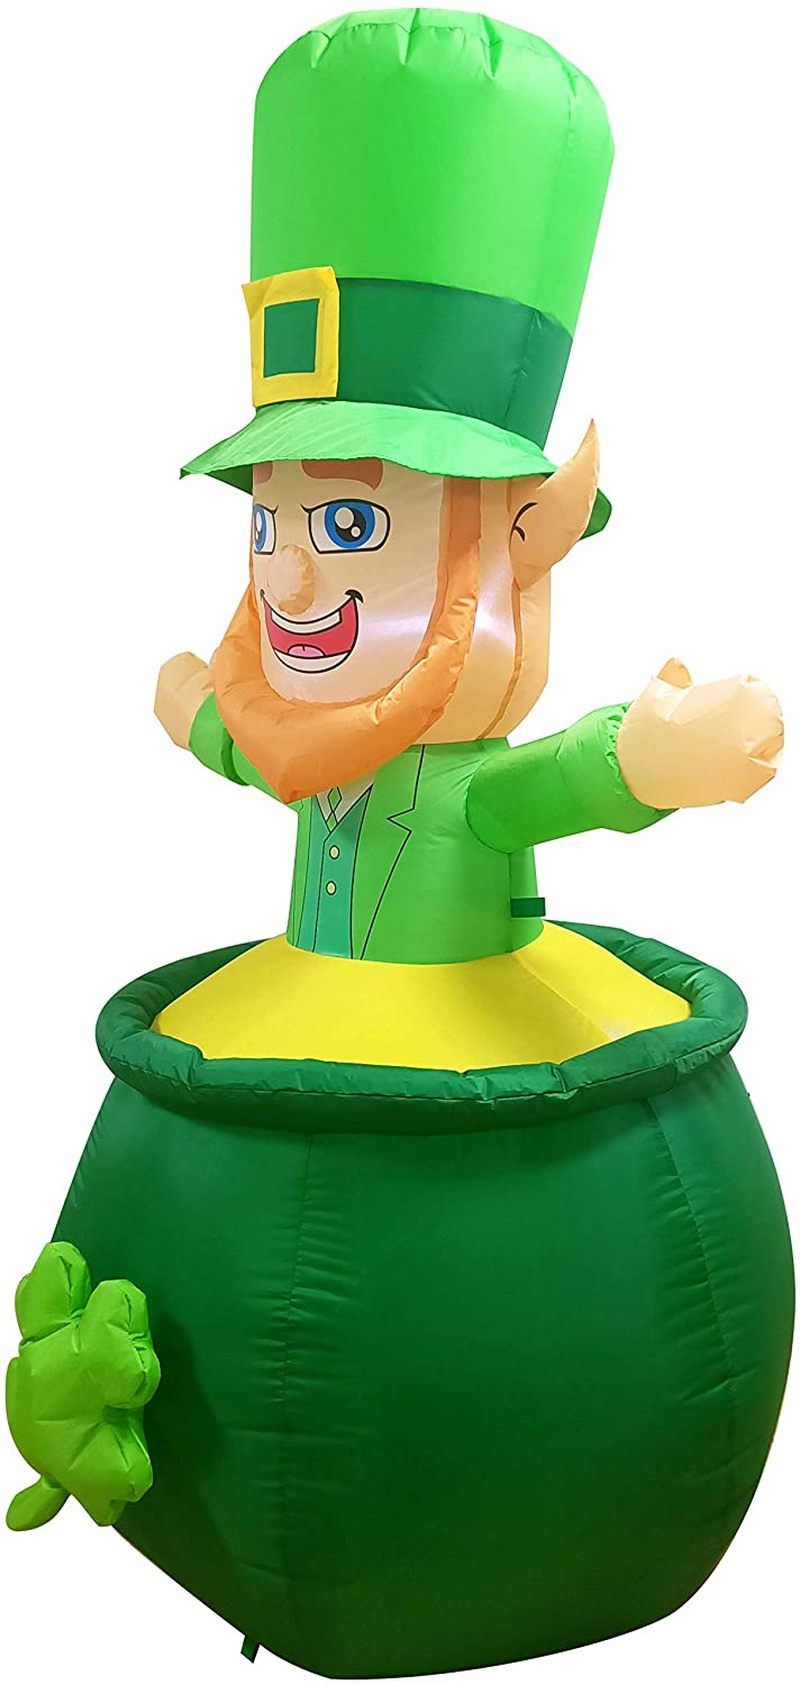 Joiedomi 6 FT St Patricks Day Inflatable Leprechaun in Cauldron Pot of Gold Coin Inflatable Yard Decorations with LED Light Build-In Arts & Entertainment > Party & Celebration > Party Supplies Joiedomi   